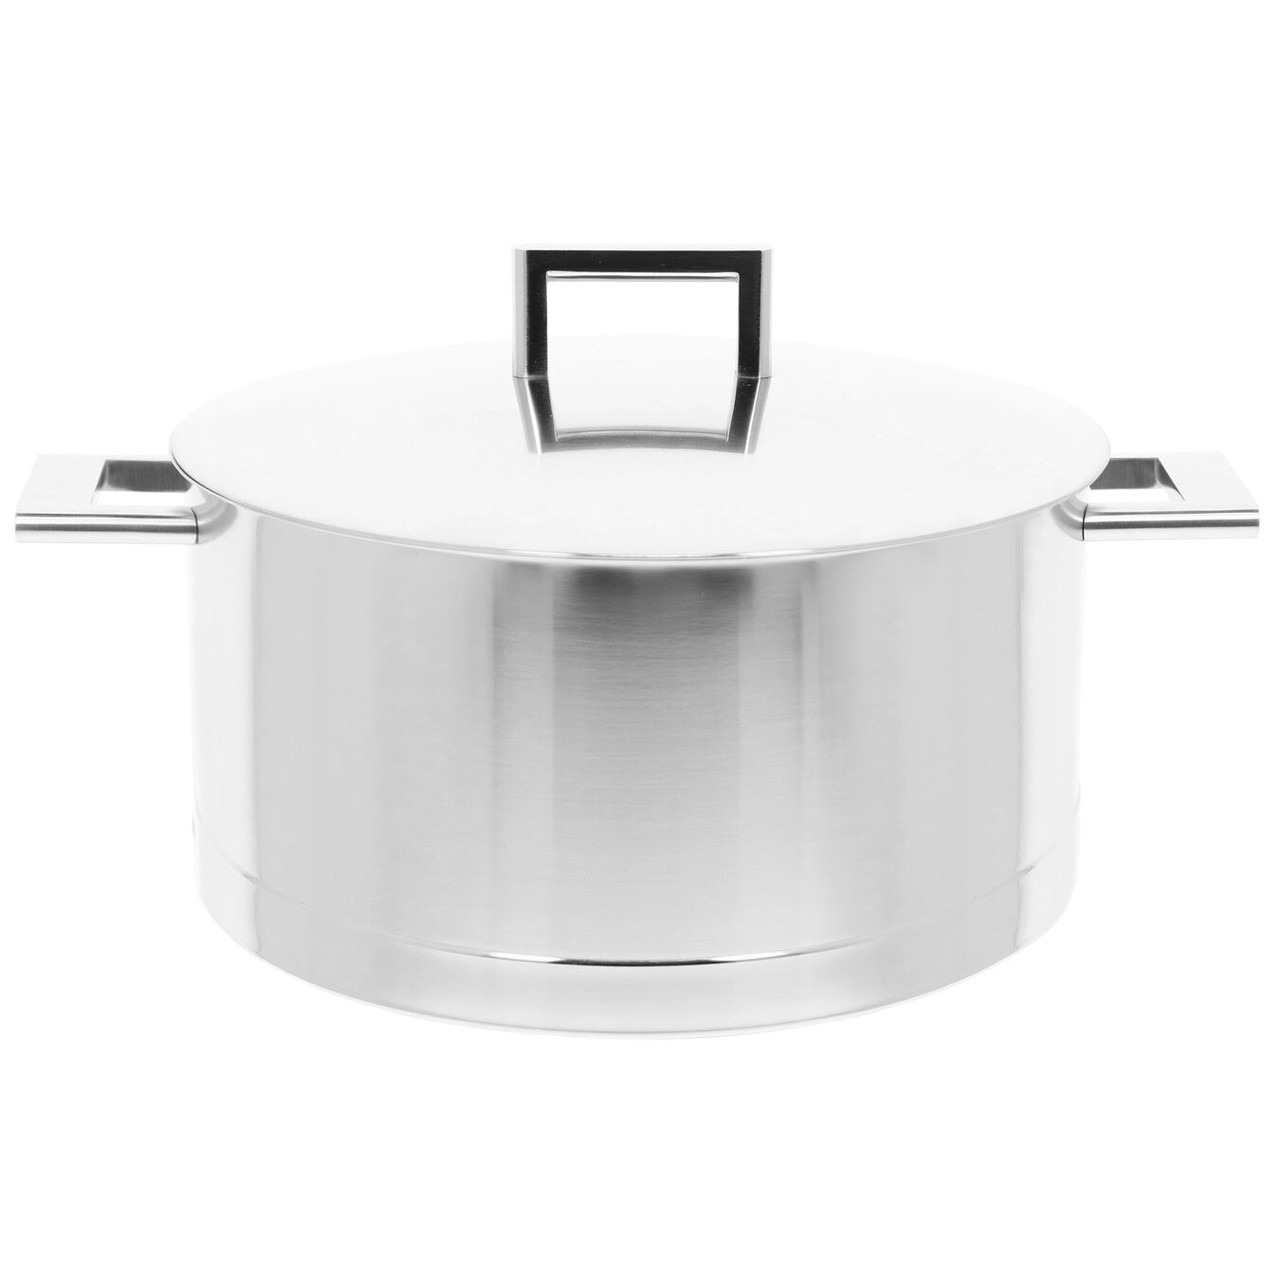 Demeyere Atlantis7 Stainless Steel Dutch Oven with Lid